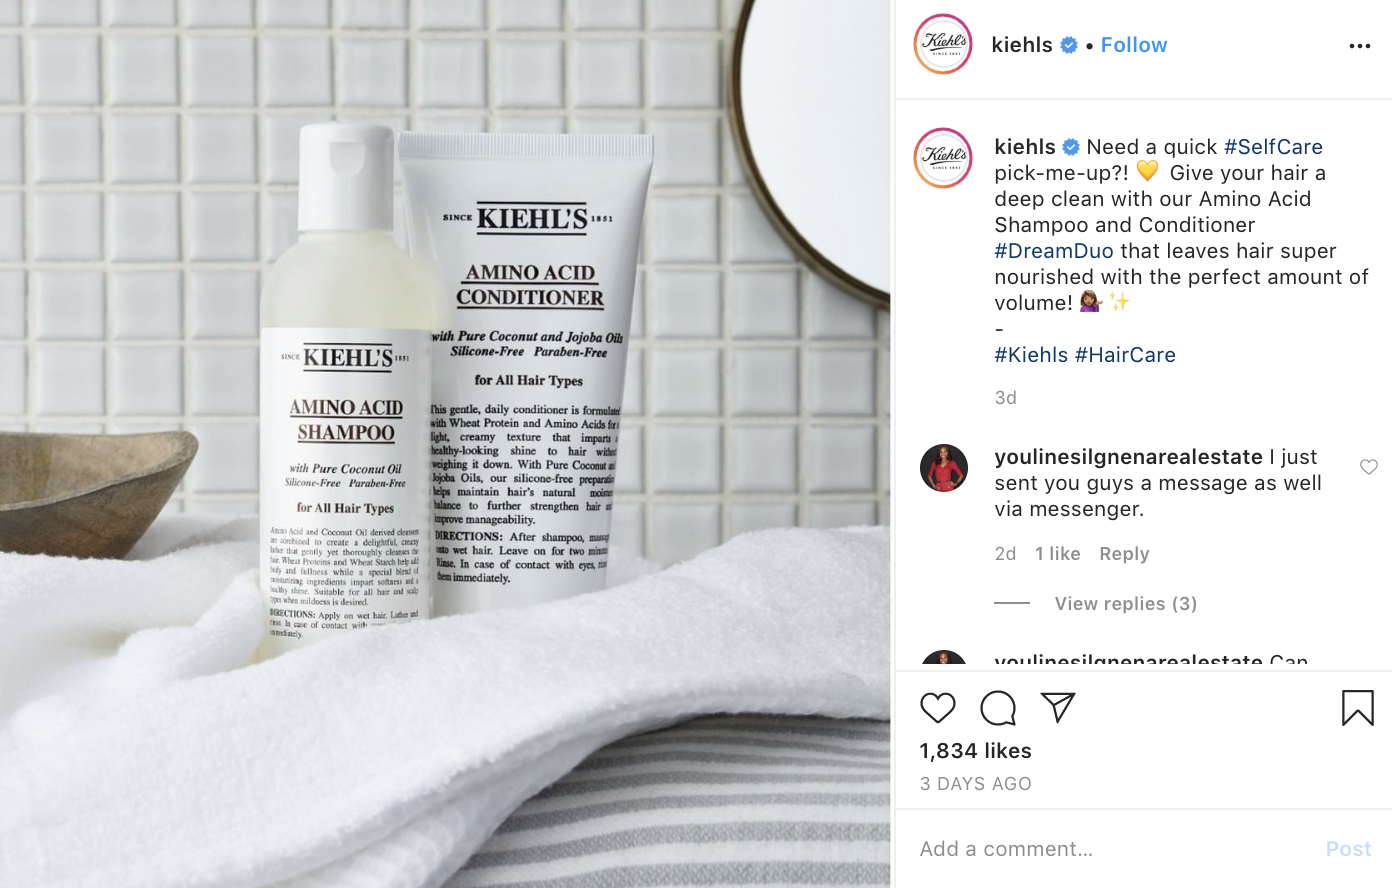 Kiehl’s using the self-care hashtag regarding its hair care products.